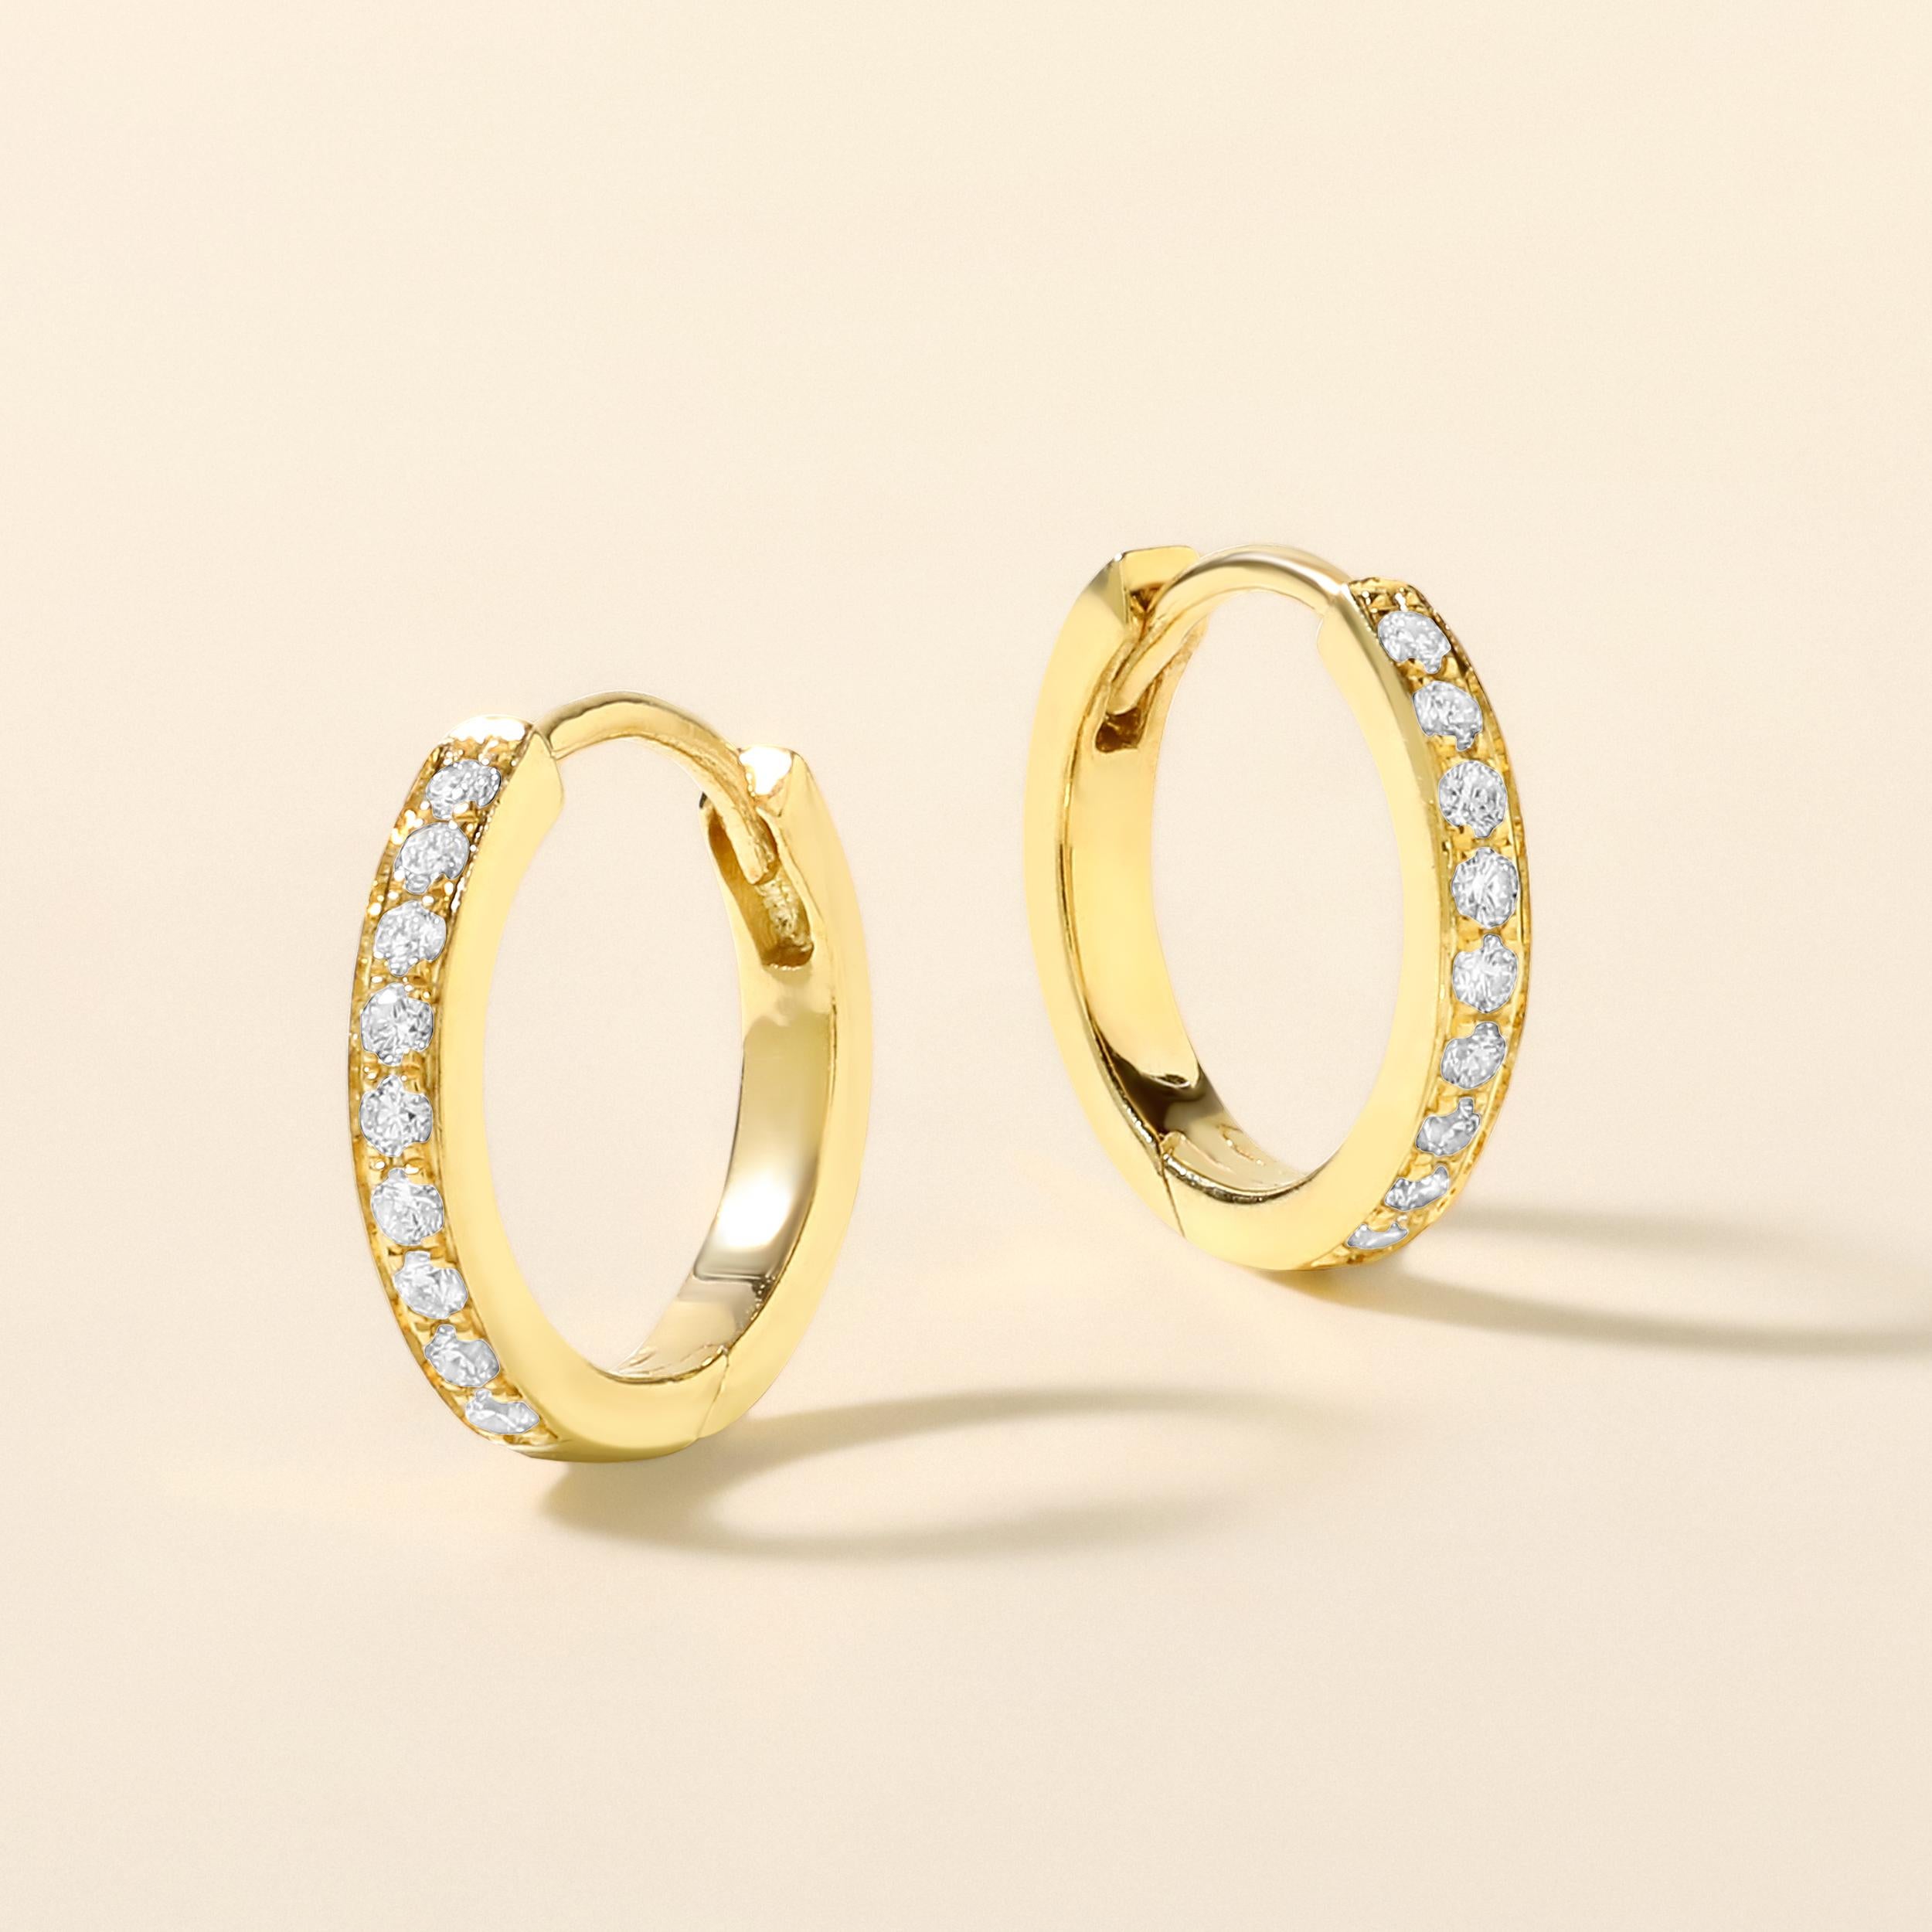 Crafted in 1.53 grams of 18K Yellow Gold, the earrings contains 18 stones of Round Diamonds with a total of 0.09 carat in E-F color and VVS clarity.

This jewelry piece will be expertly crafted by our skilled artisans upon order. Allow us a shipping